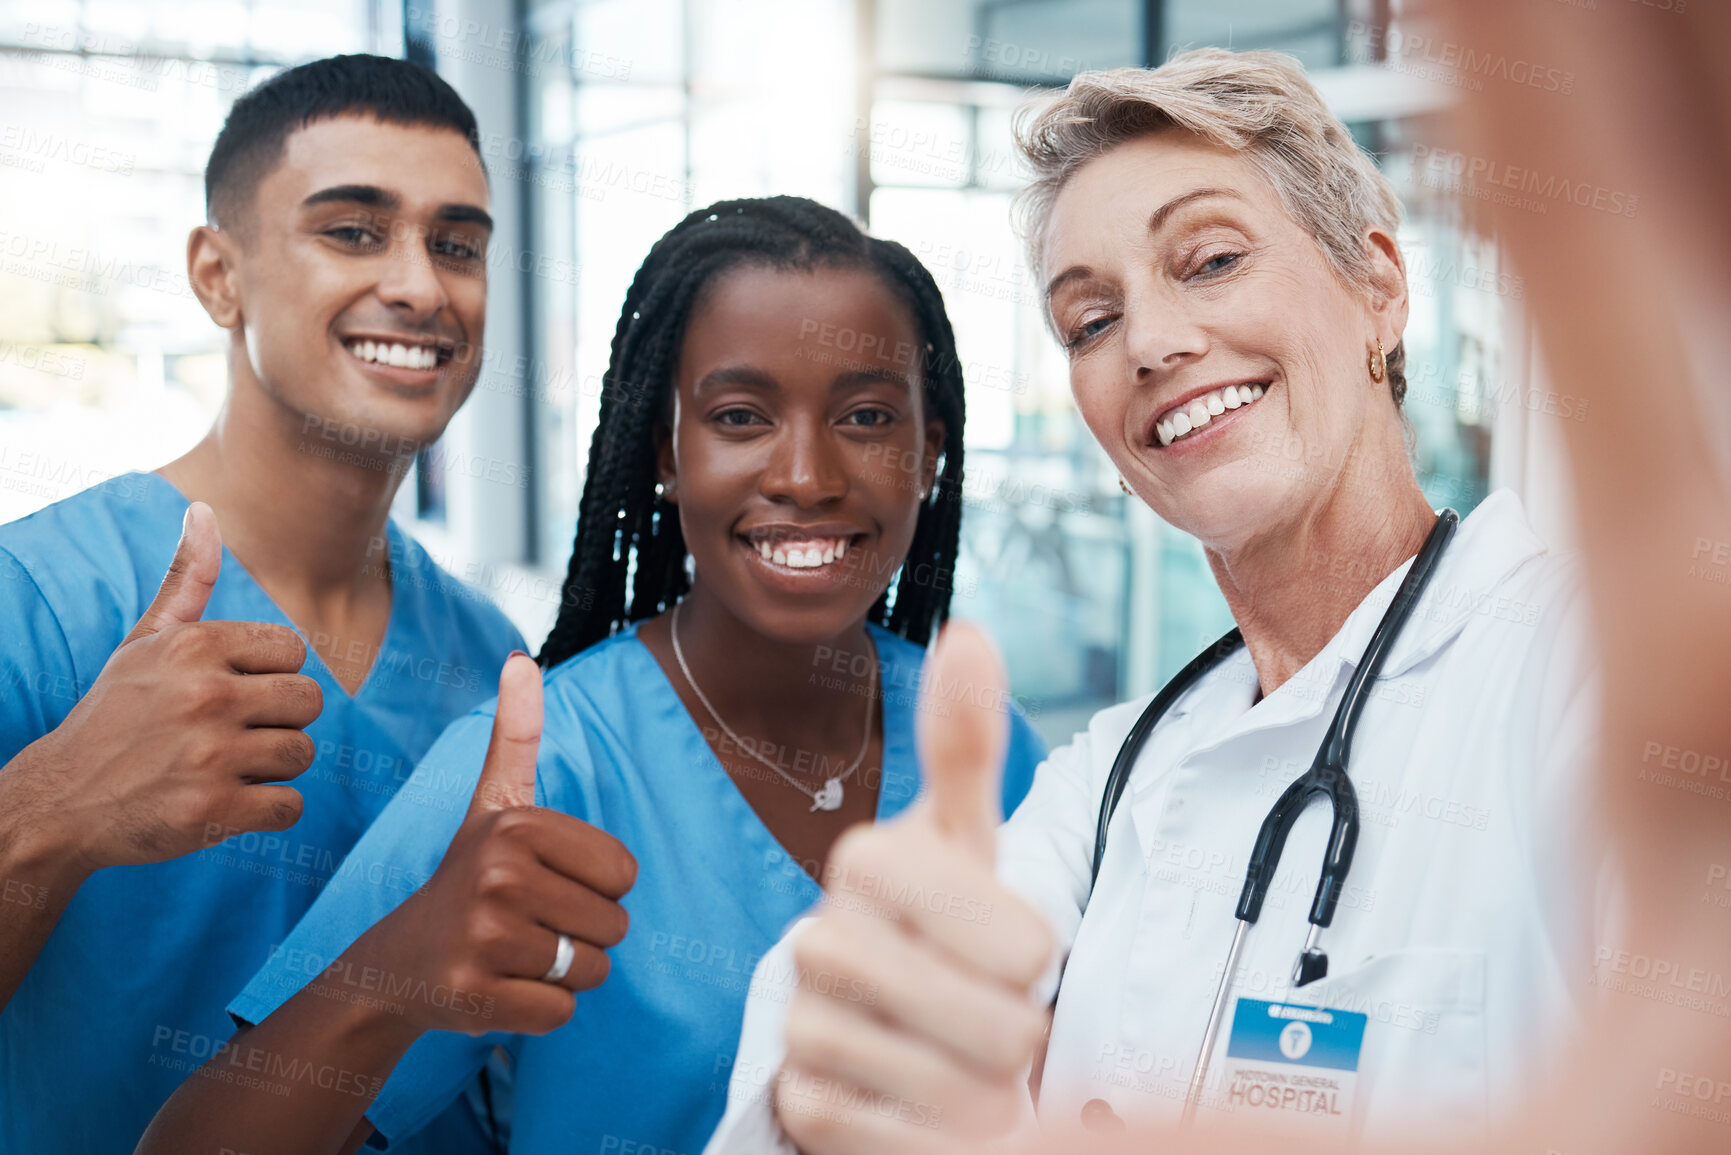 Buy stock photo Selfie, doctor and students with thumbs up portrait at hospital for success, diversity and healthcare. Interracial, teamwork and agreement of professional medical people with smile for cooperation.

